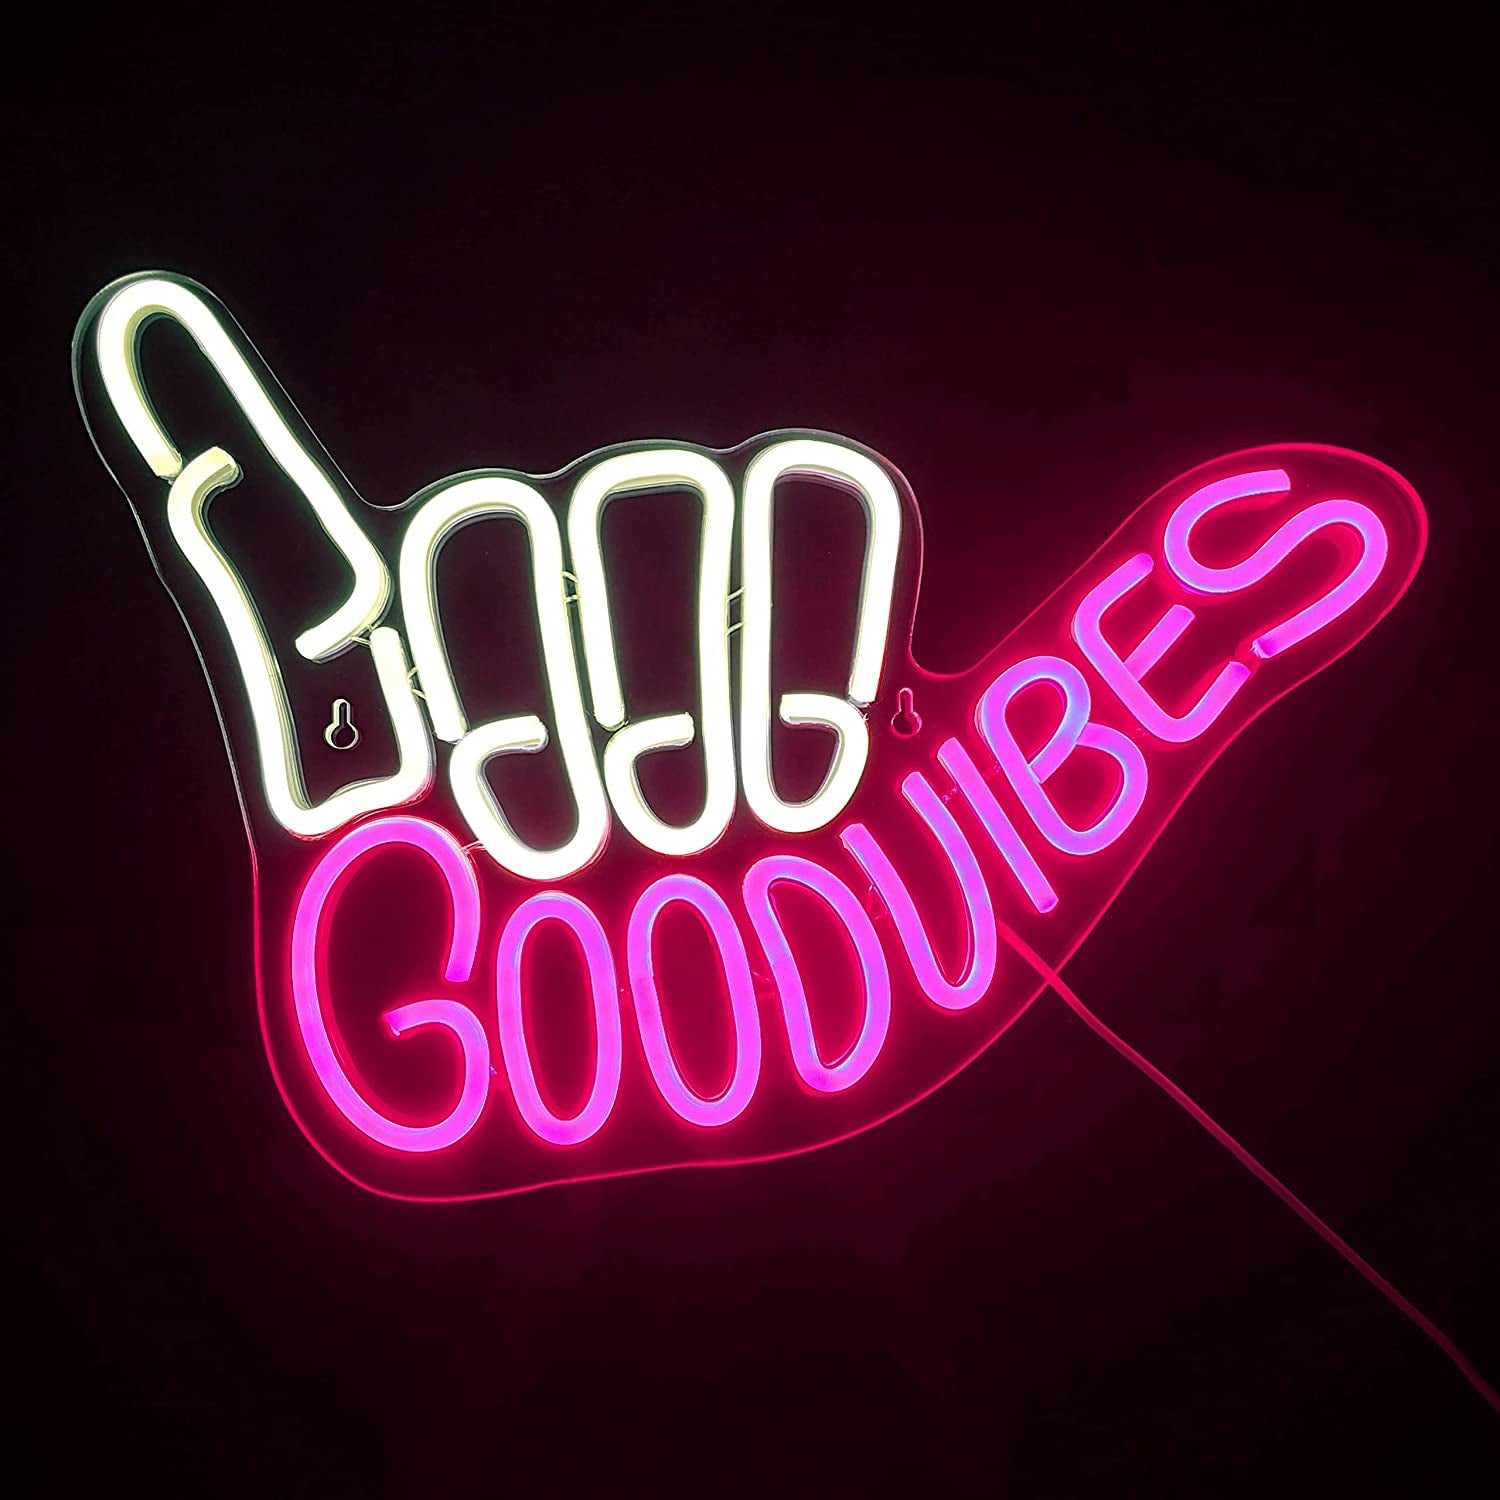 Good Vibes Neon Sign Light for Wall Décor Good Vibes Only Hand Neon Signs Bedroom Game Room Light up LED Wall Sign Cool Things for Teen Room Sign Gamer Gift Party Holiday (2 - Good Vibes - Blue)